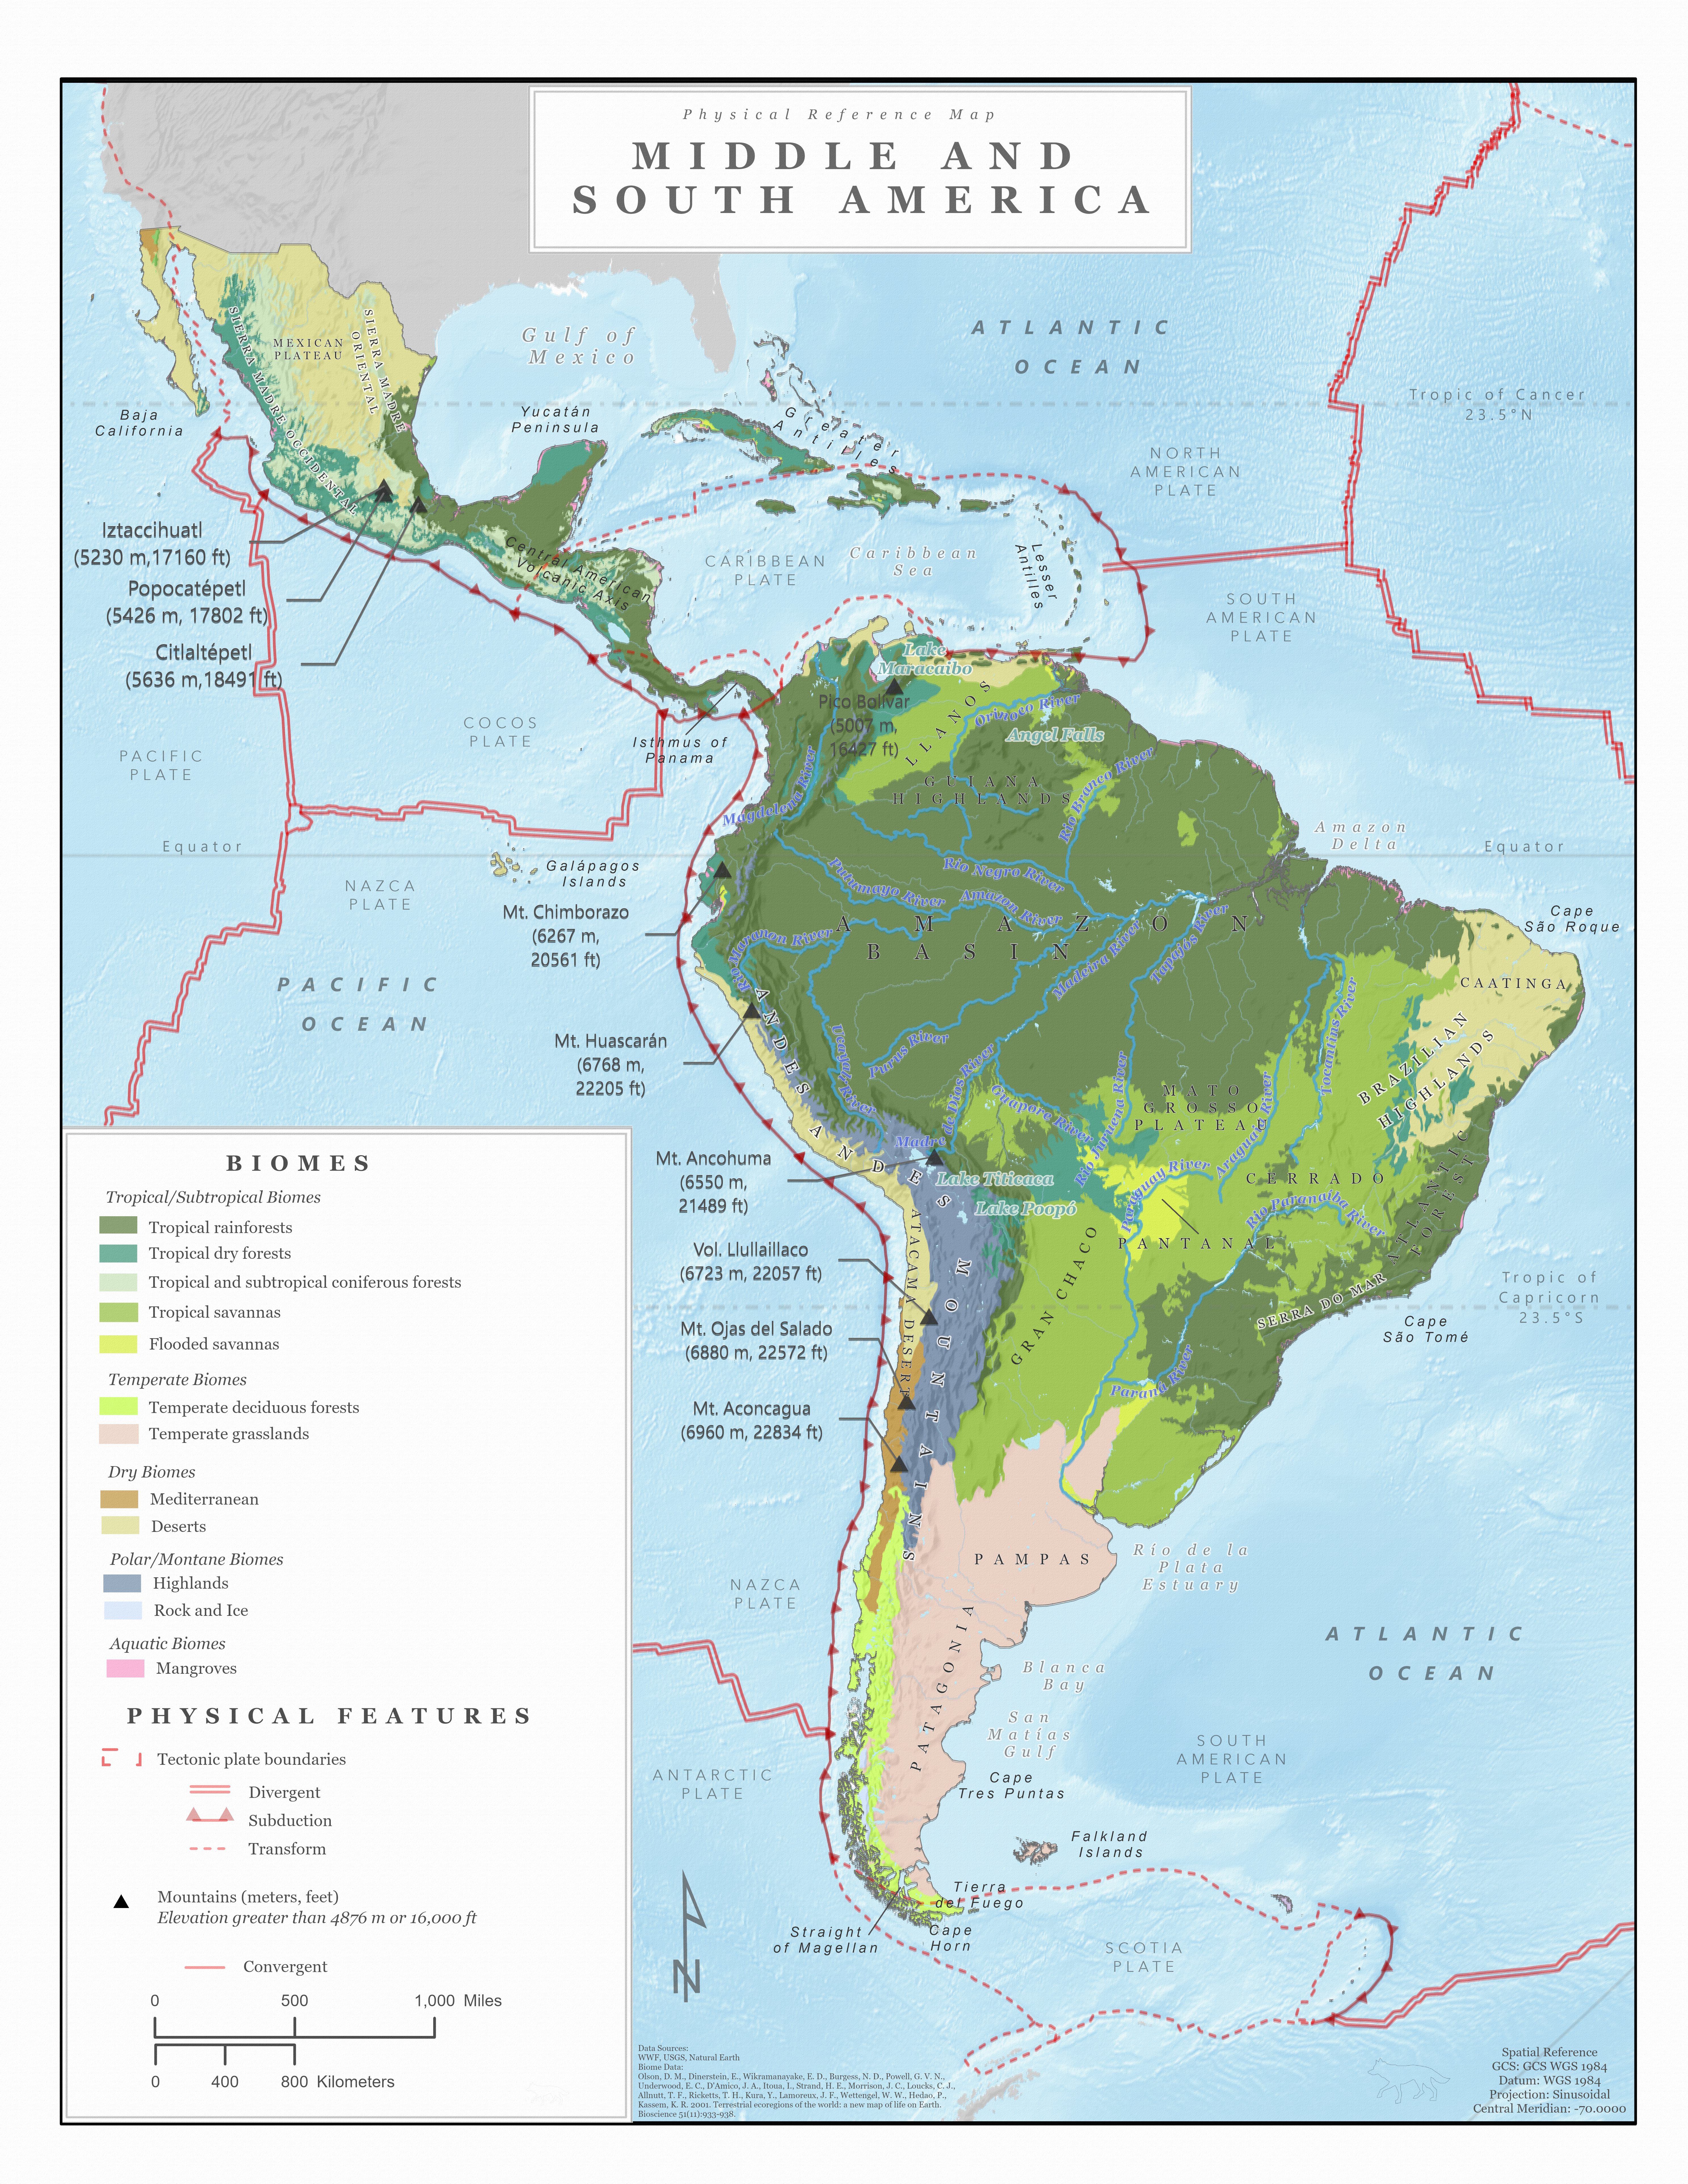 Biome and physical features map of Middle and South America